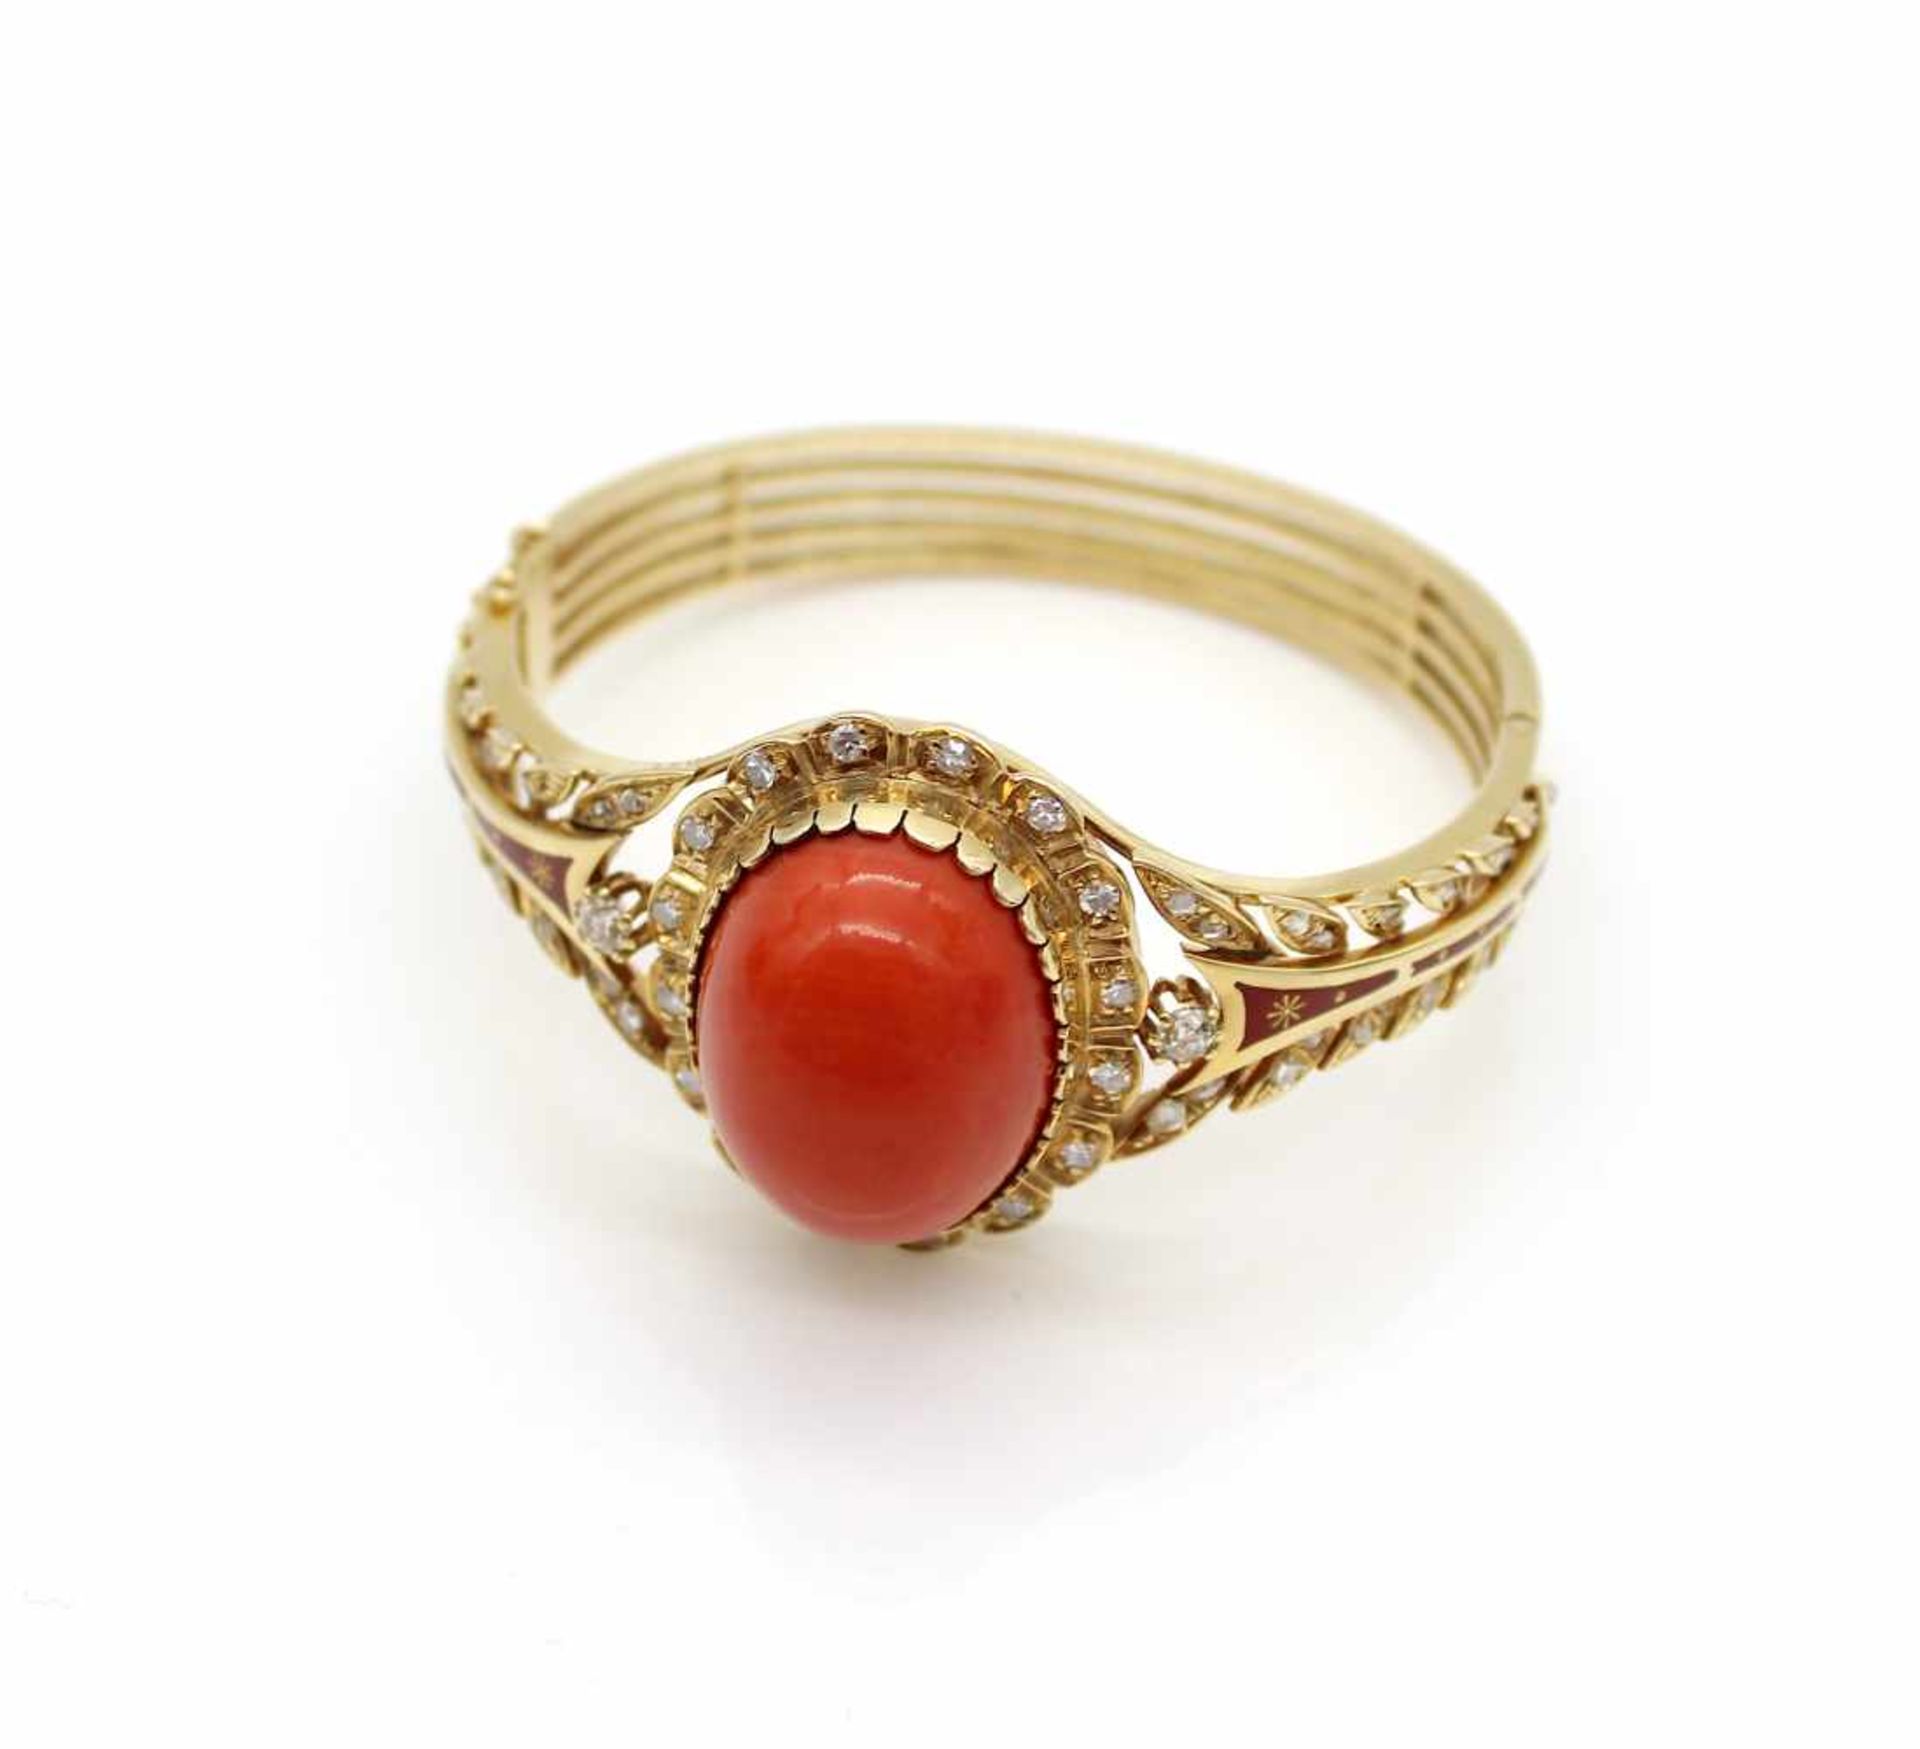 Bracelet made of 585 gold with an oval, orange-red coral approx. 47 ct, 58 diamonds partly old cut - Bild 2 aus 4